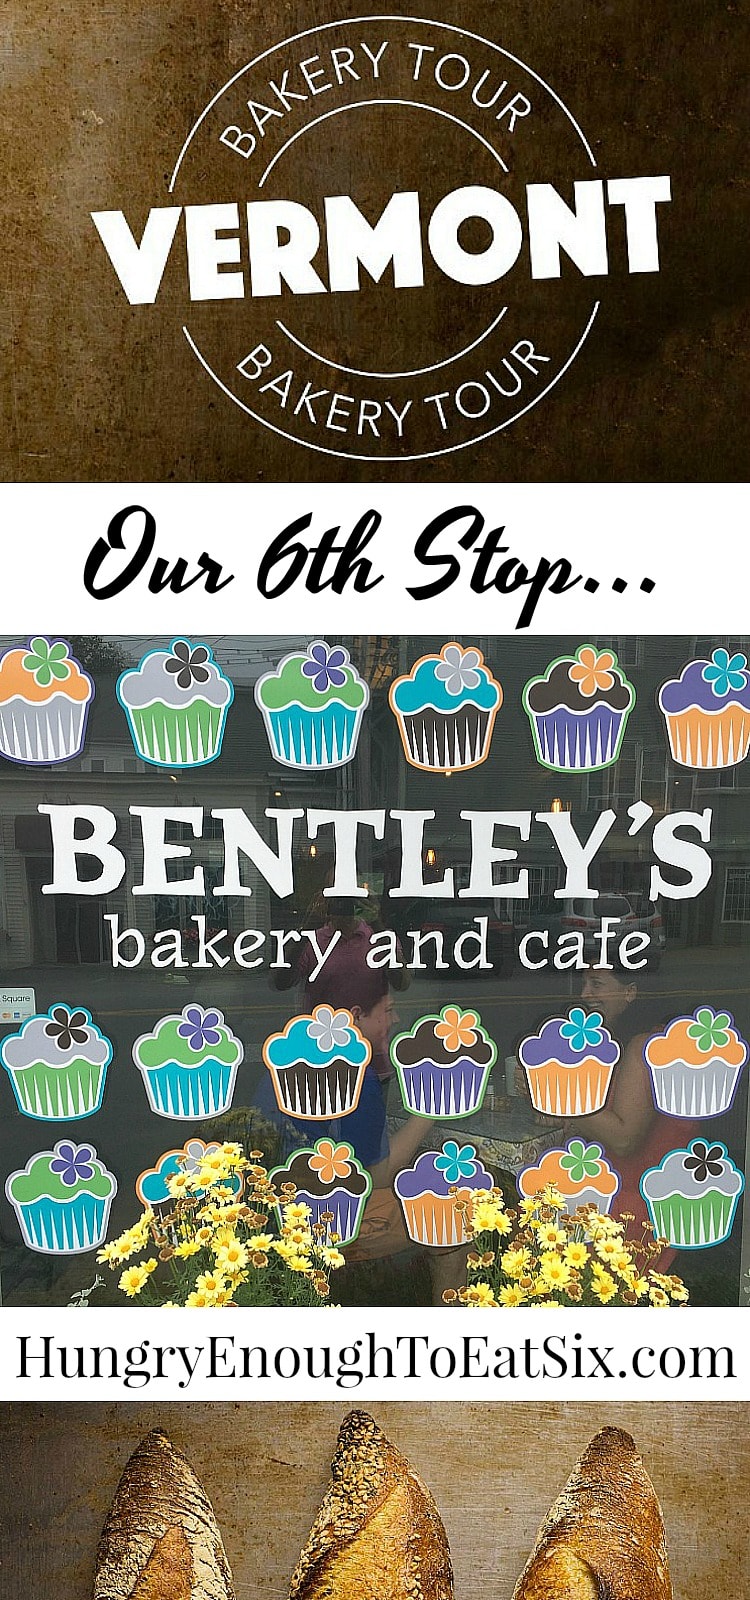 Delectable Destinations: Bentley's Bakery & Cafe, Our 6th Stop on the Vermont Bakery Tour! We visited Bentley's Bakery & Cafe in Danville, Vermont, as we continue on King Arthur Flour's Vermont Bakery Tour! 